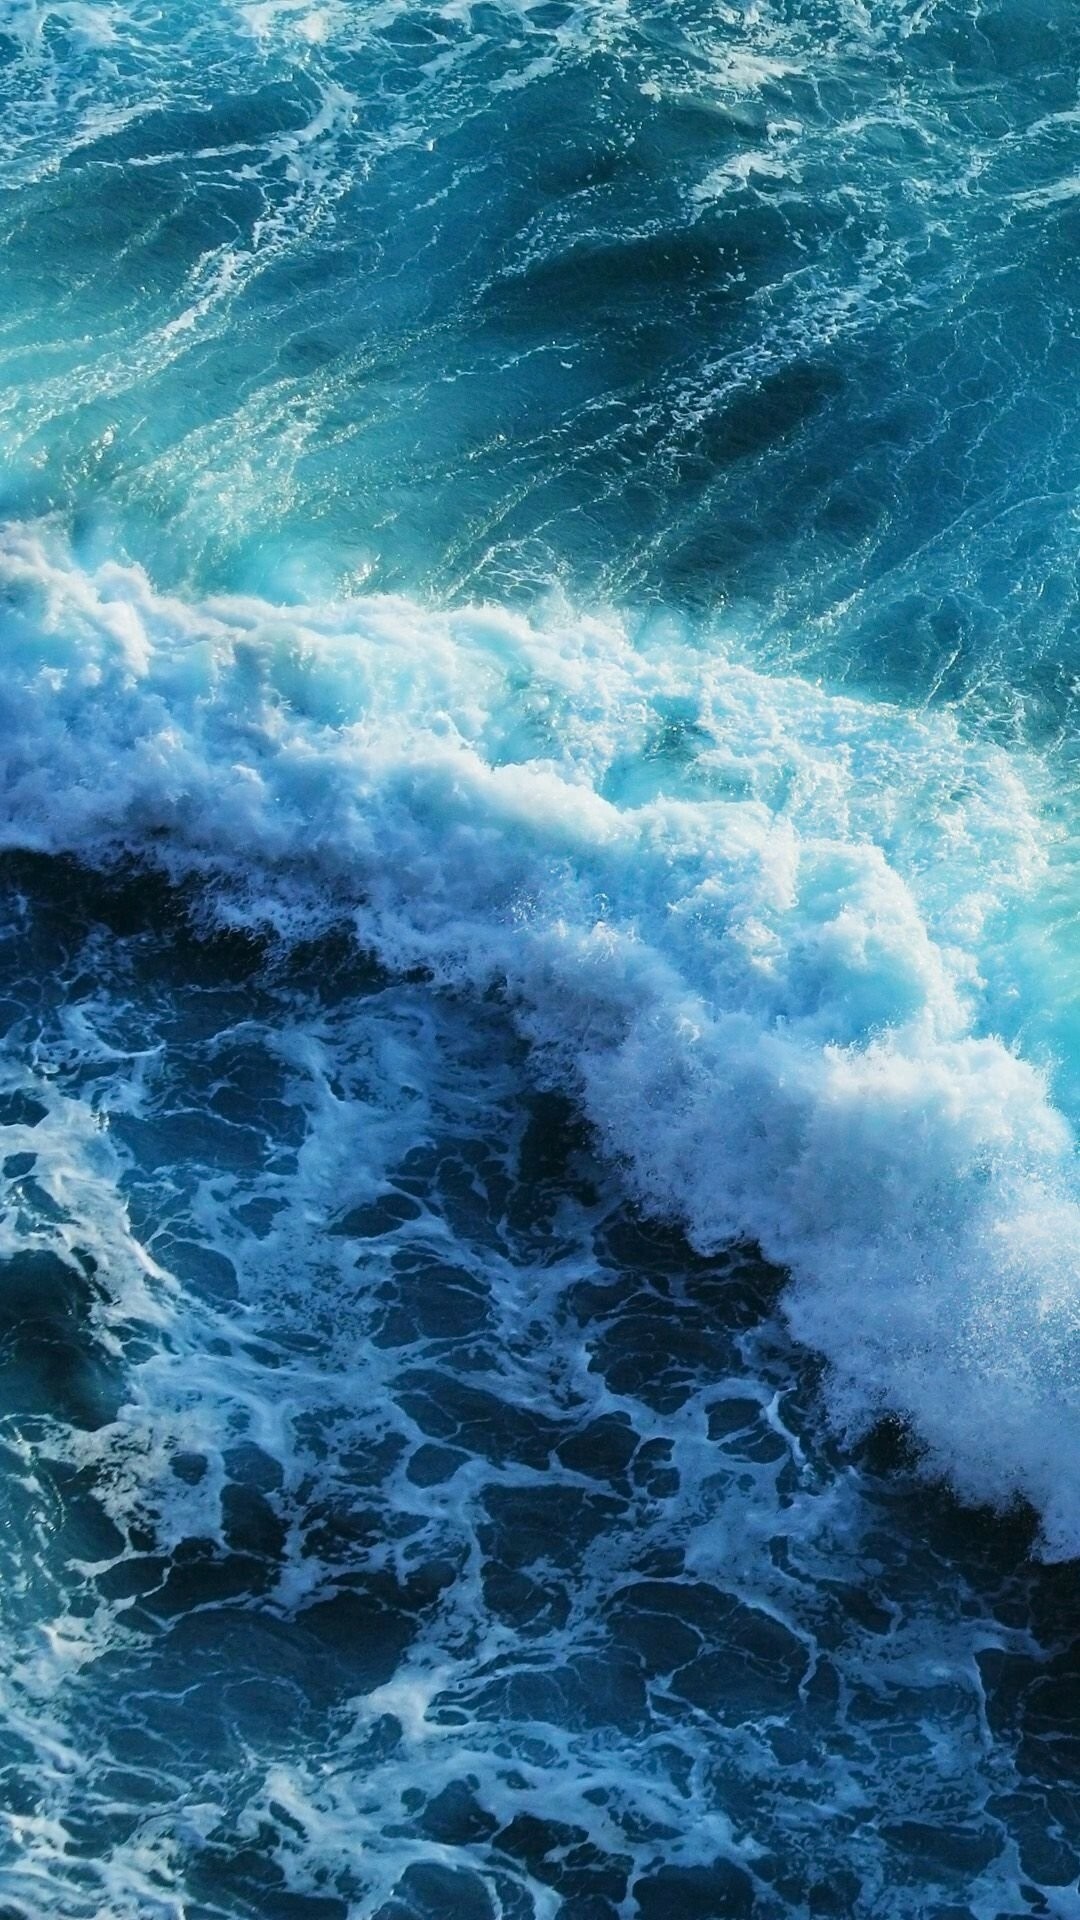 Ocean: The average depth is 12,100 feet, Natural environment. 1080x1920 Full HD Background.